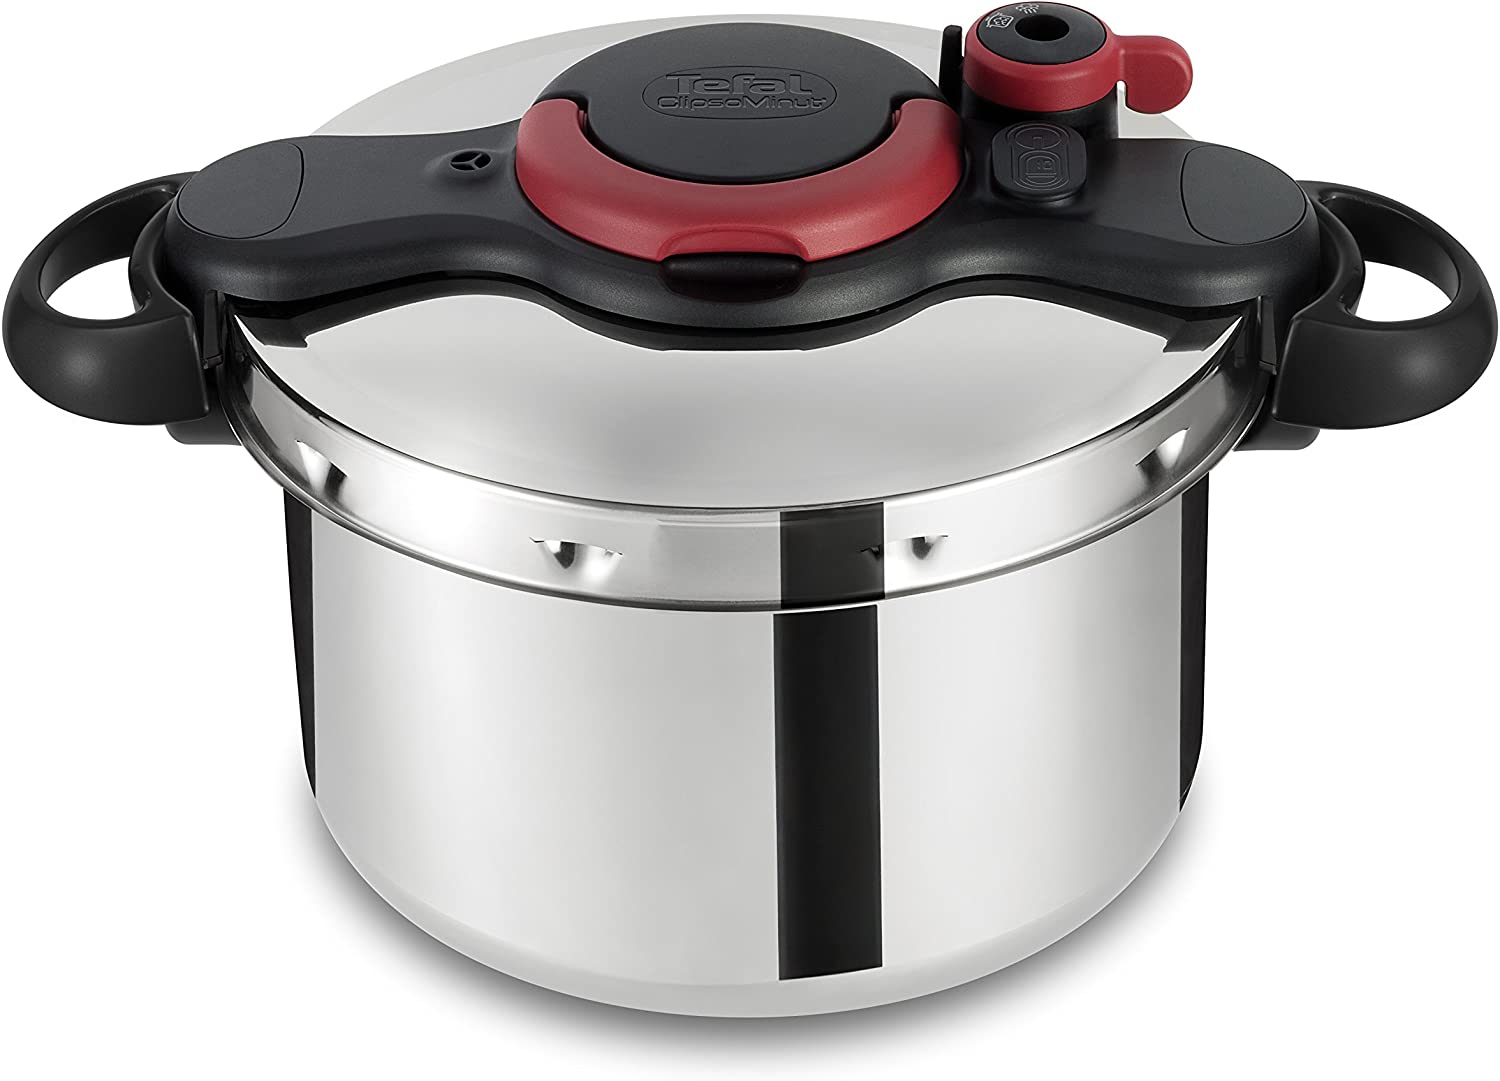 Tefal Clipso Minut Easy Pressure Cooker, Stainless Steel, Multi-Colour, 24 cm